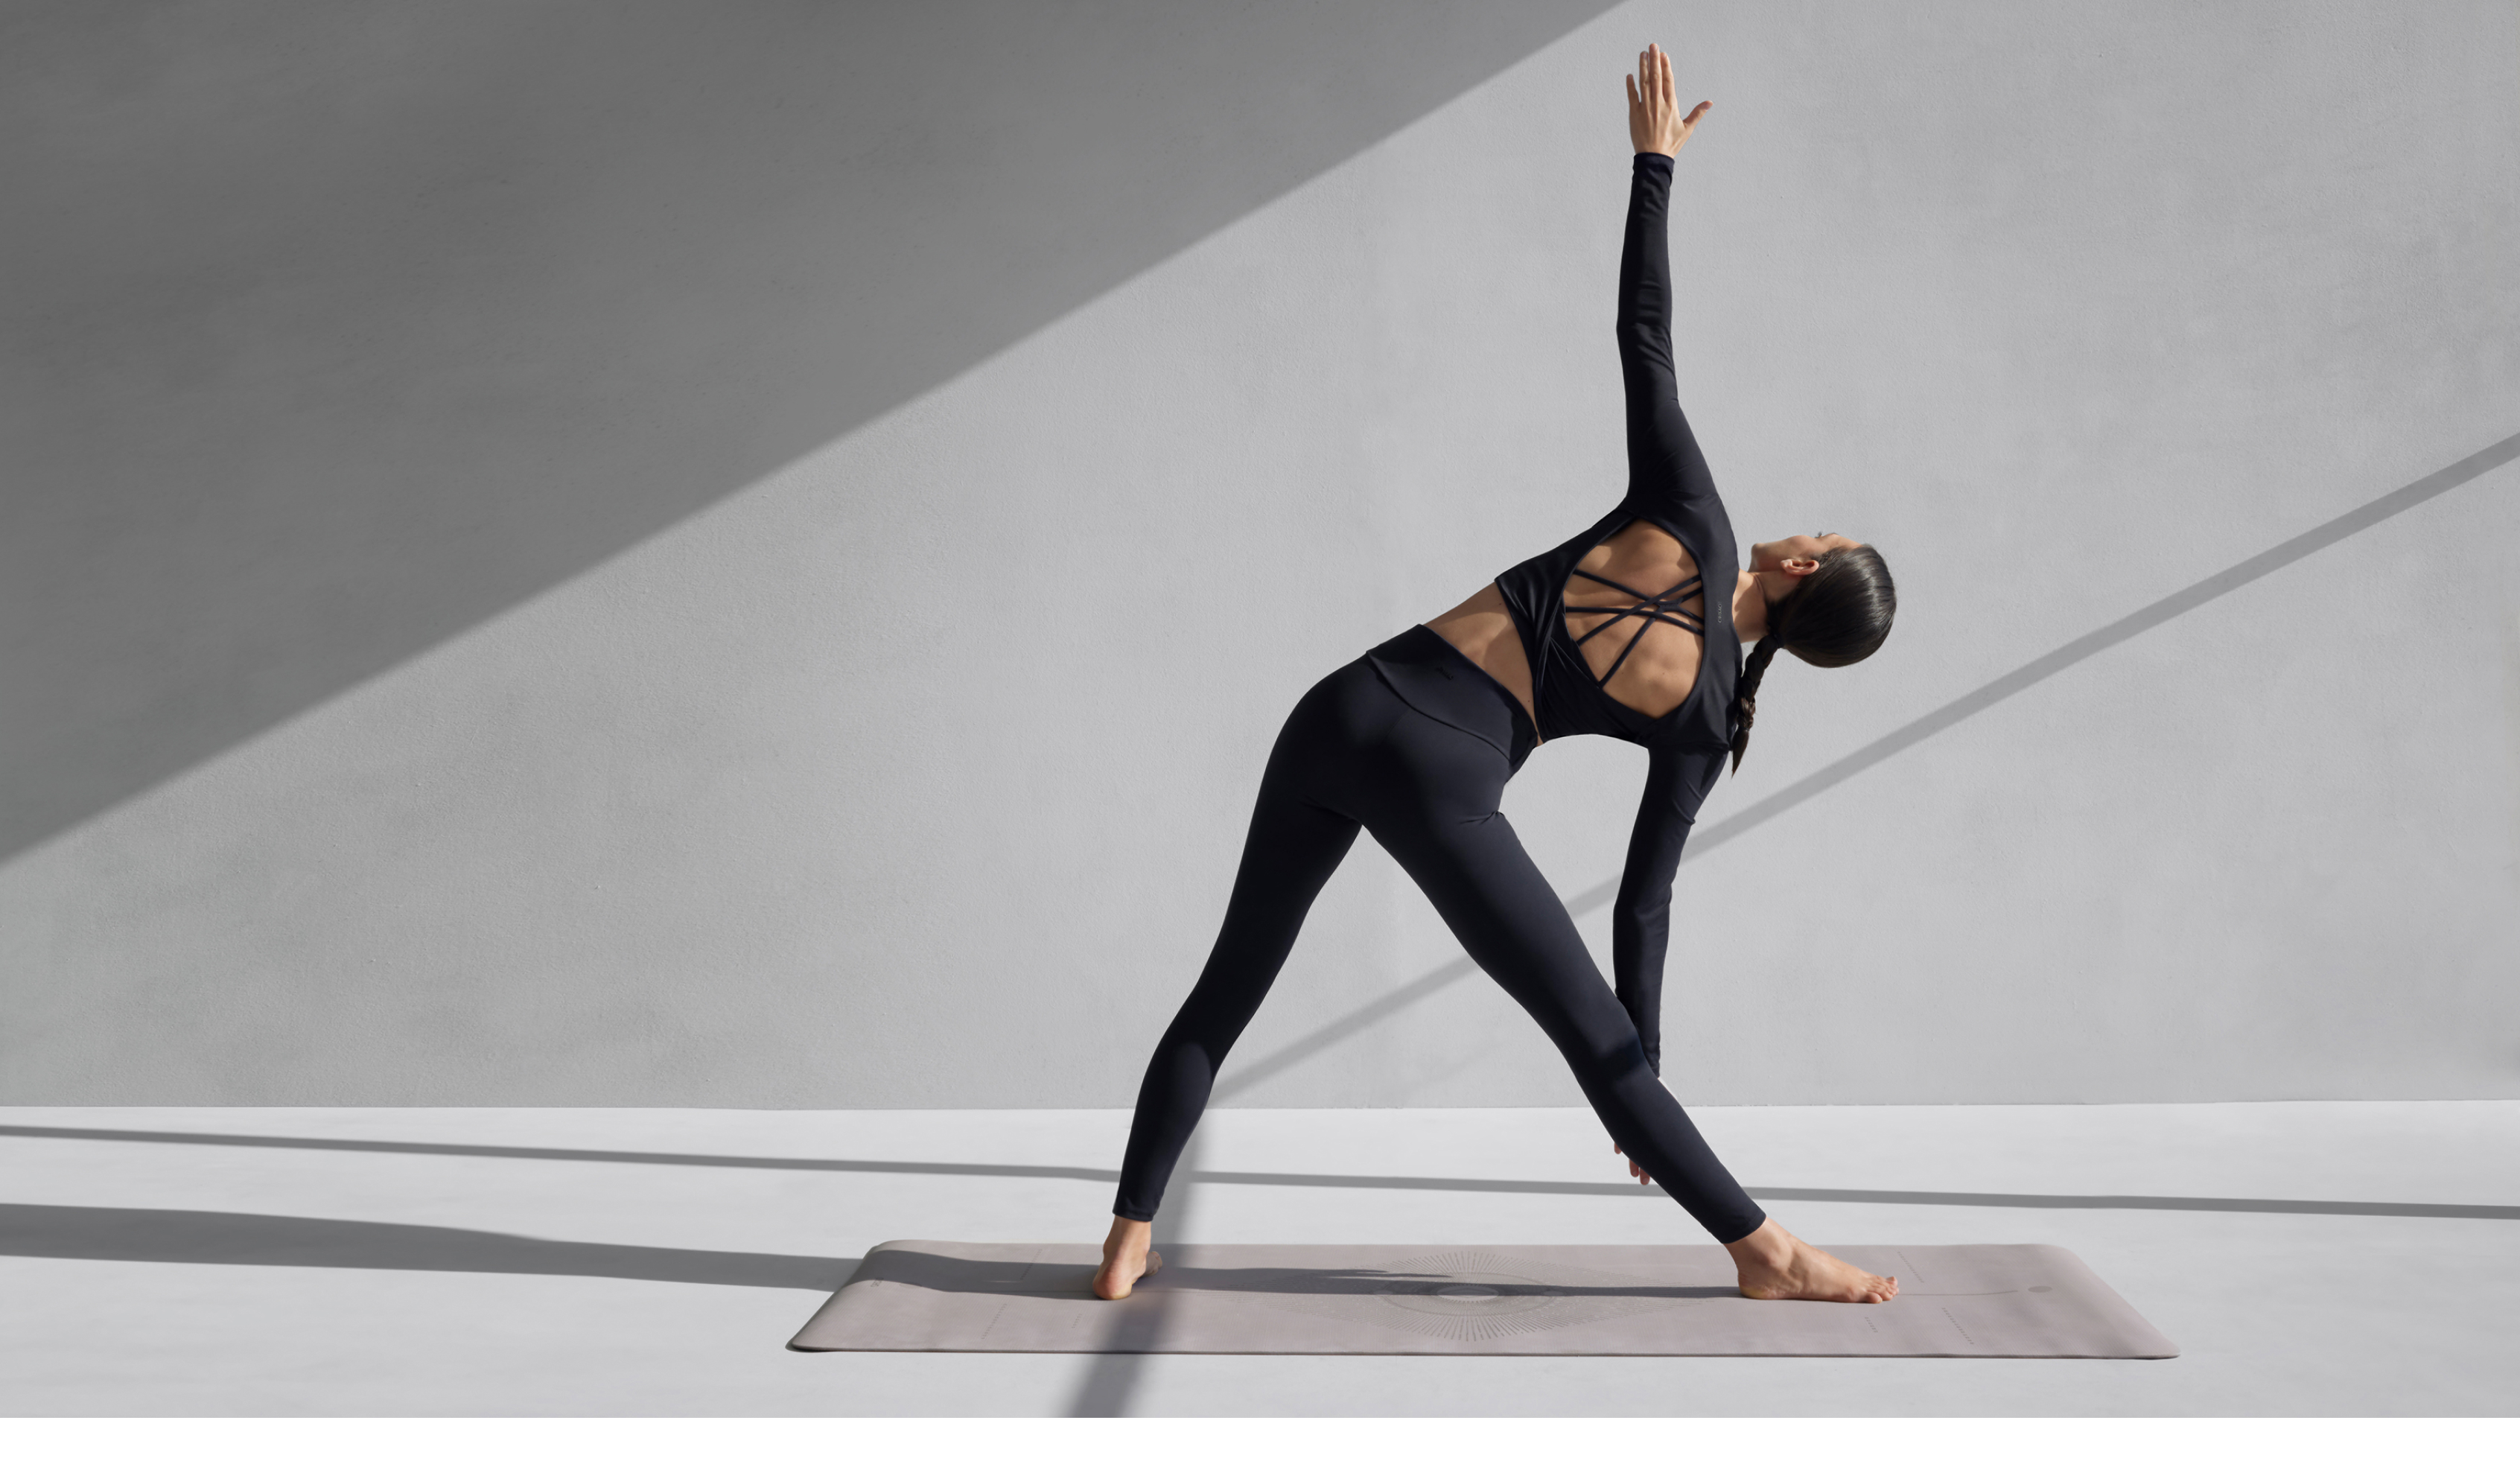 Yoga and pilates clothes for women